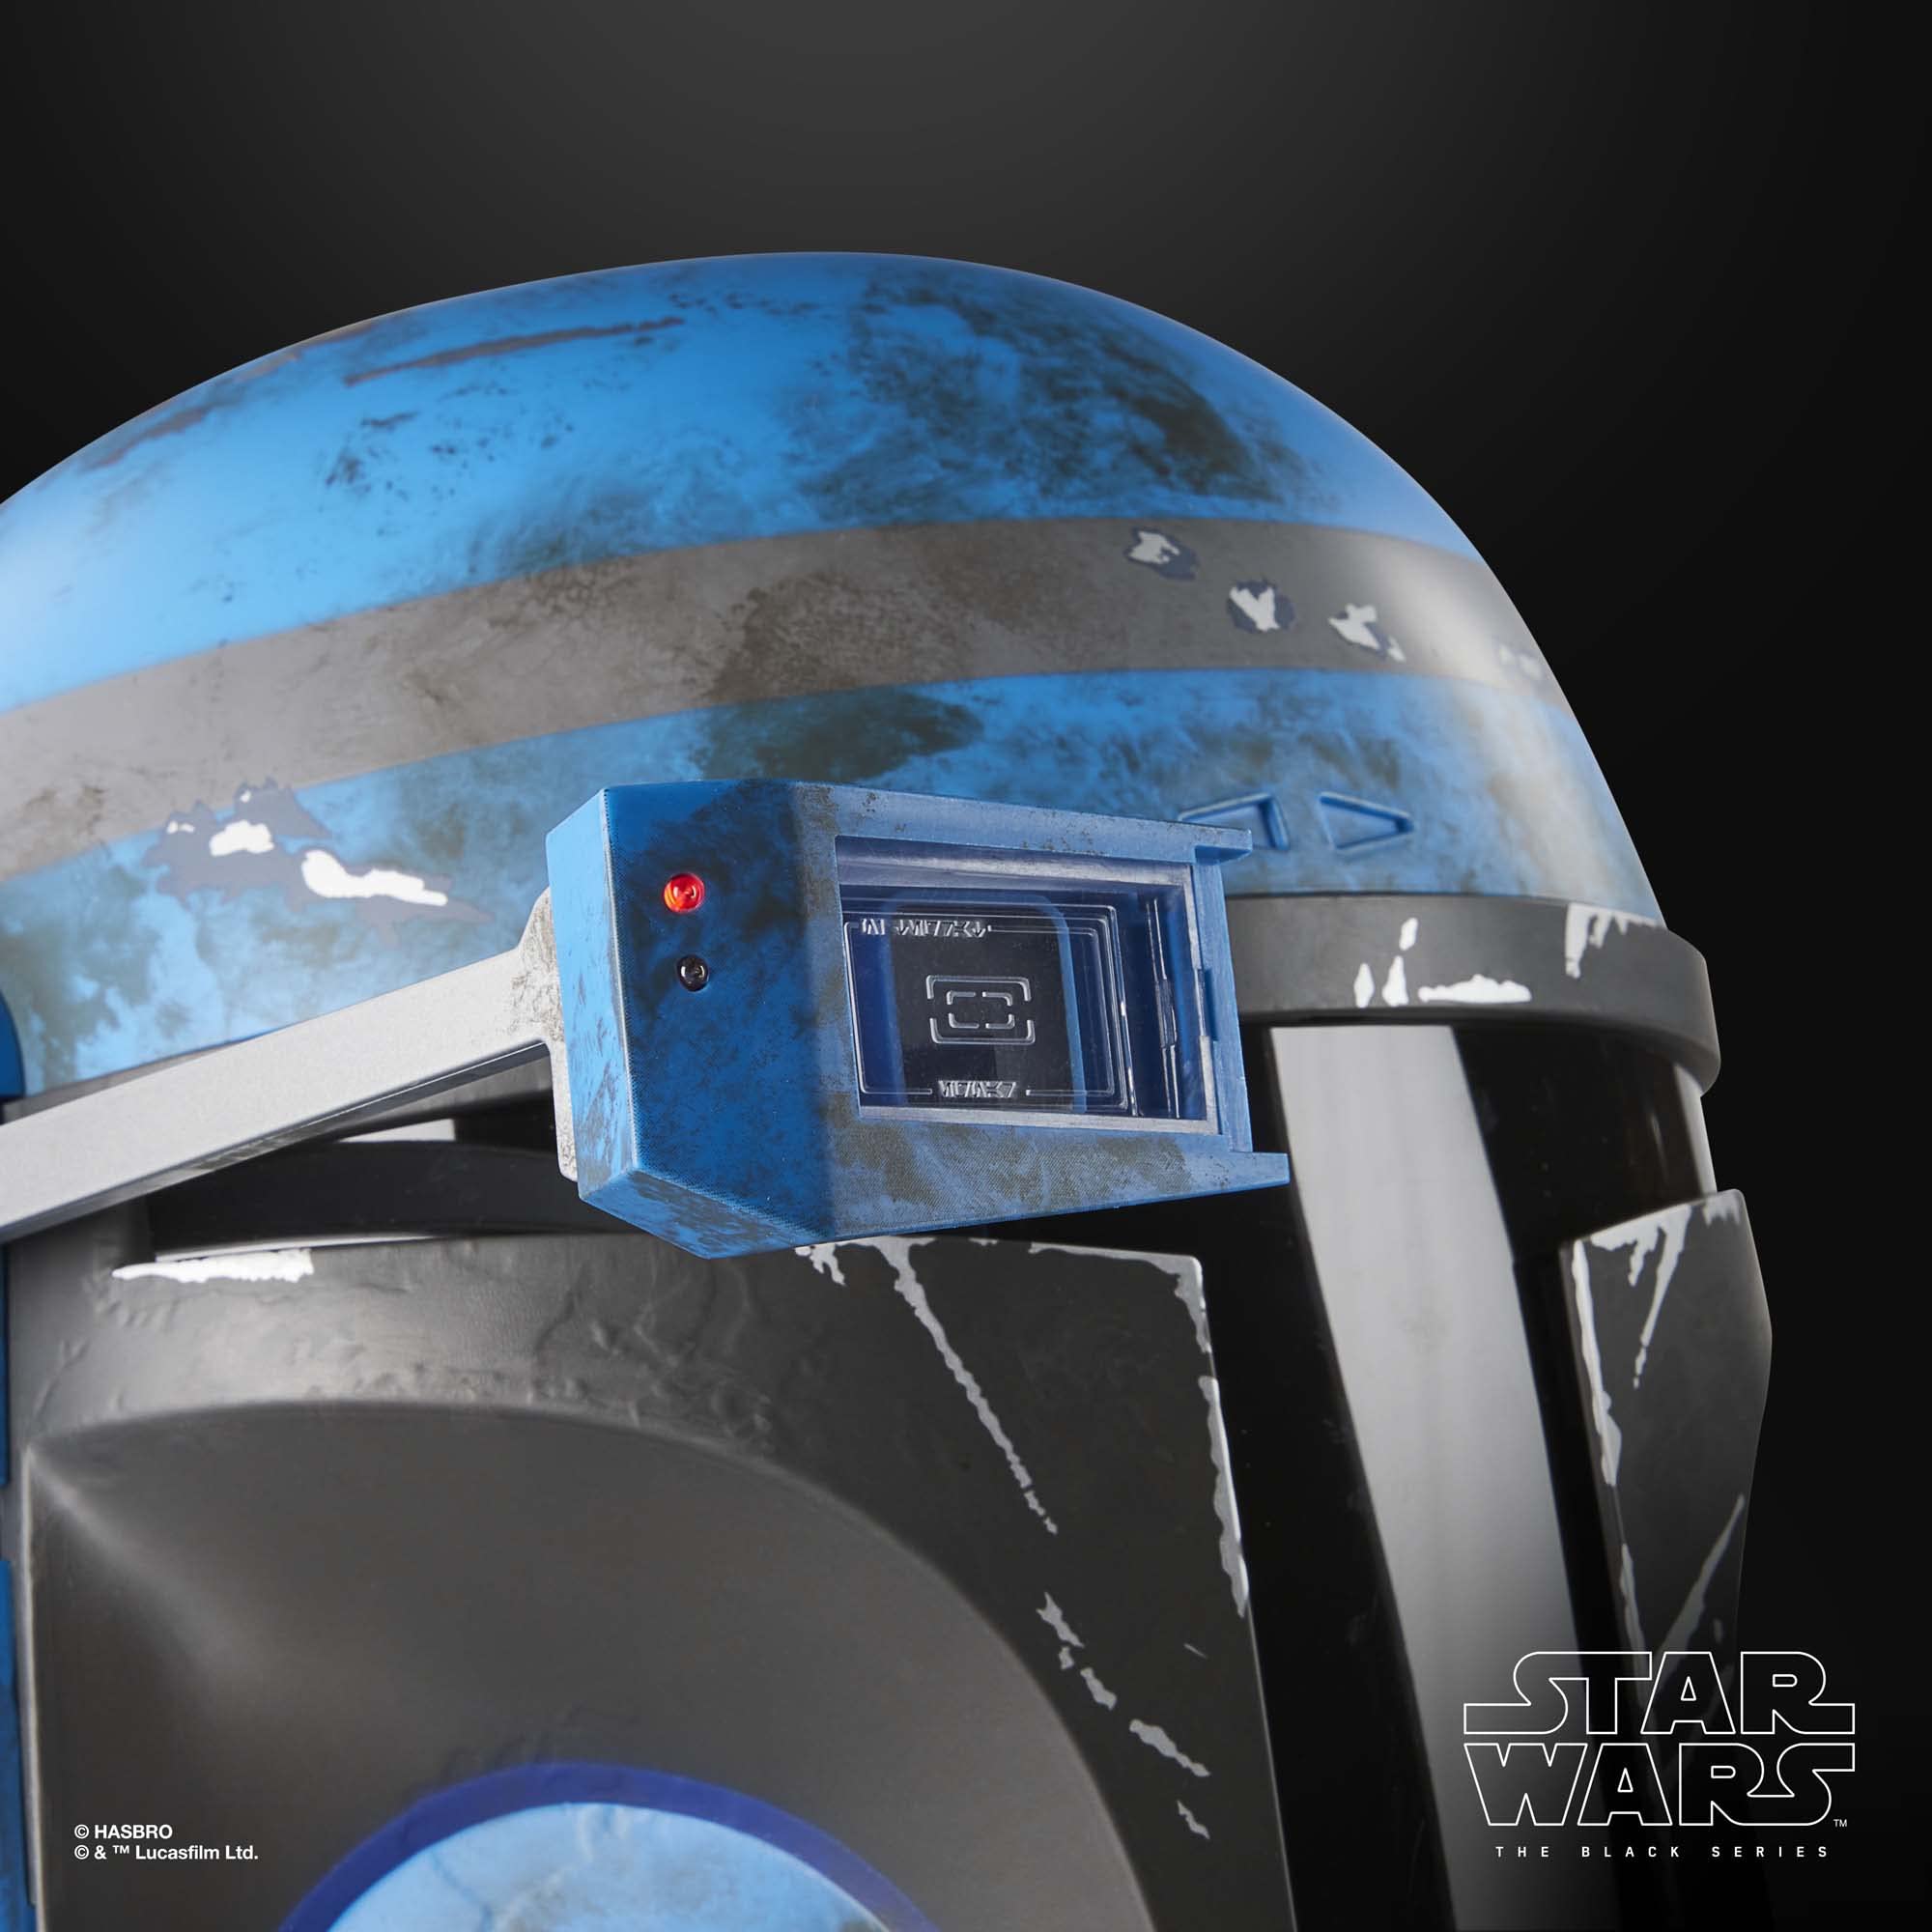 STAR WARS The Black Series Axe Woves Premium Electronic Helmet, The Mandalorian Adult Roleplay Item, Ages 14 and Up